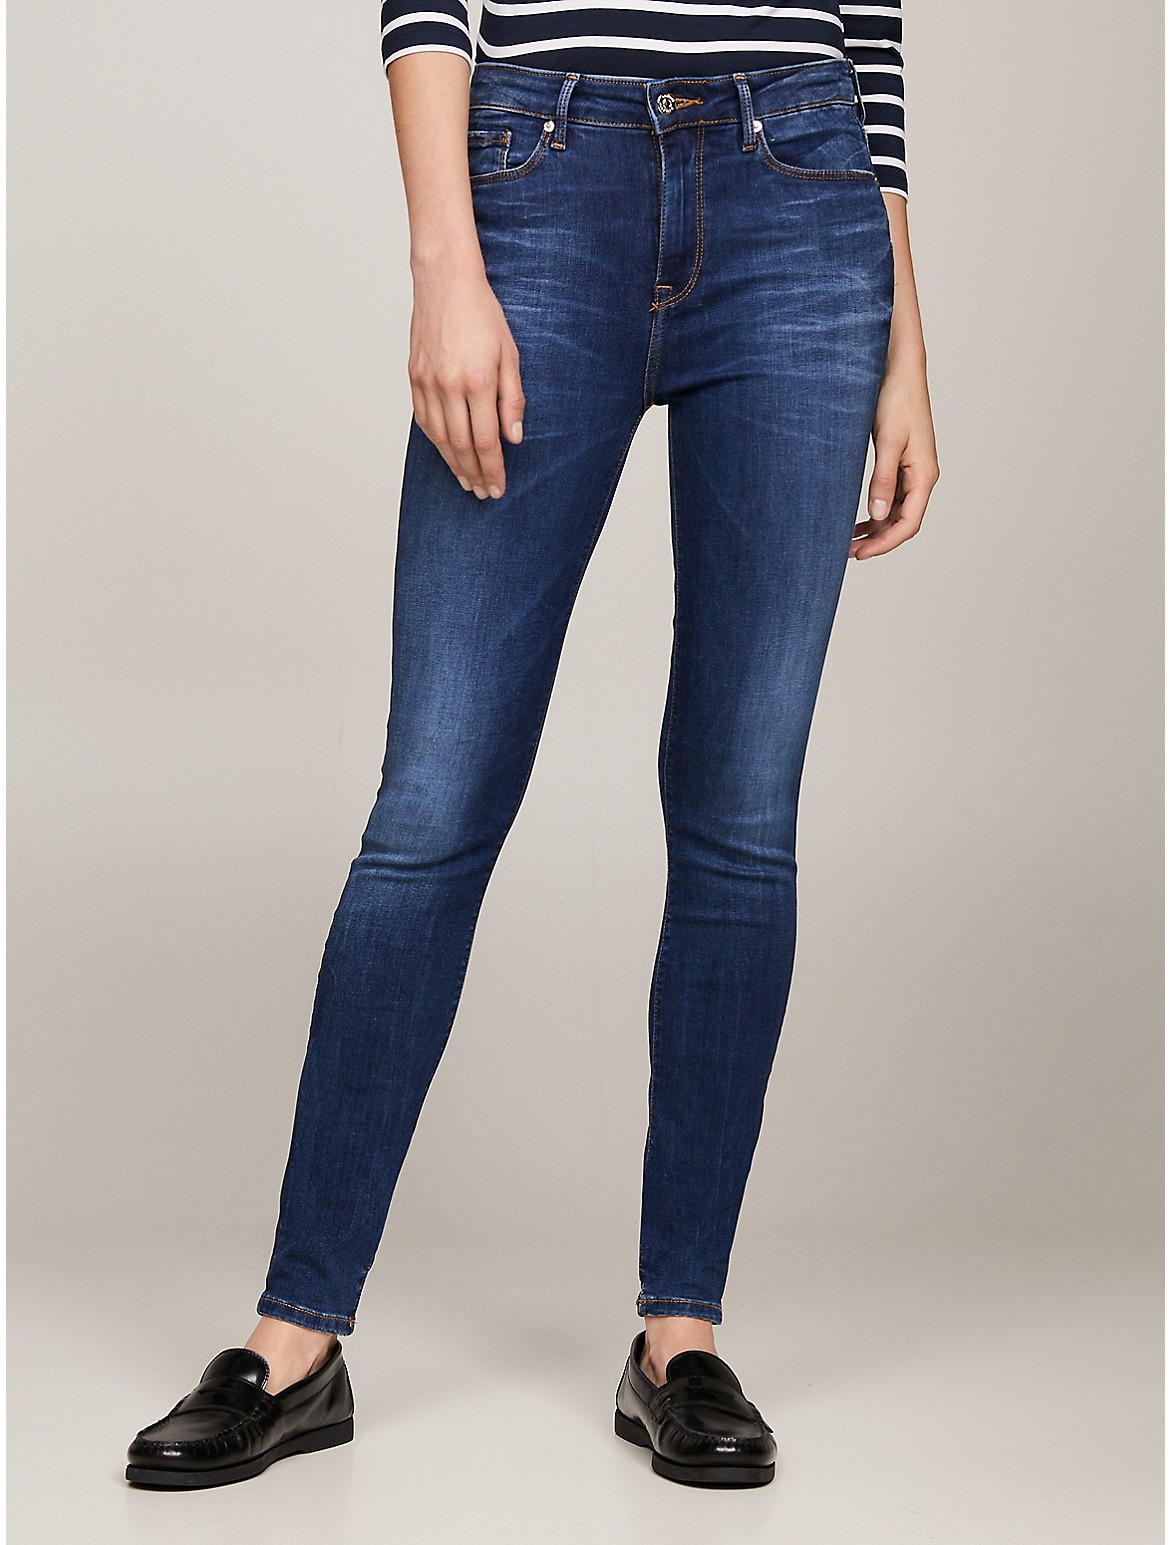 TOMMY HILFIGER ModeSens Women for | Jeans